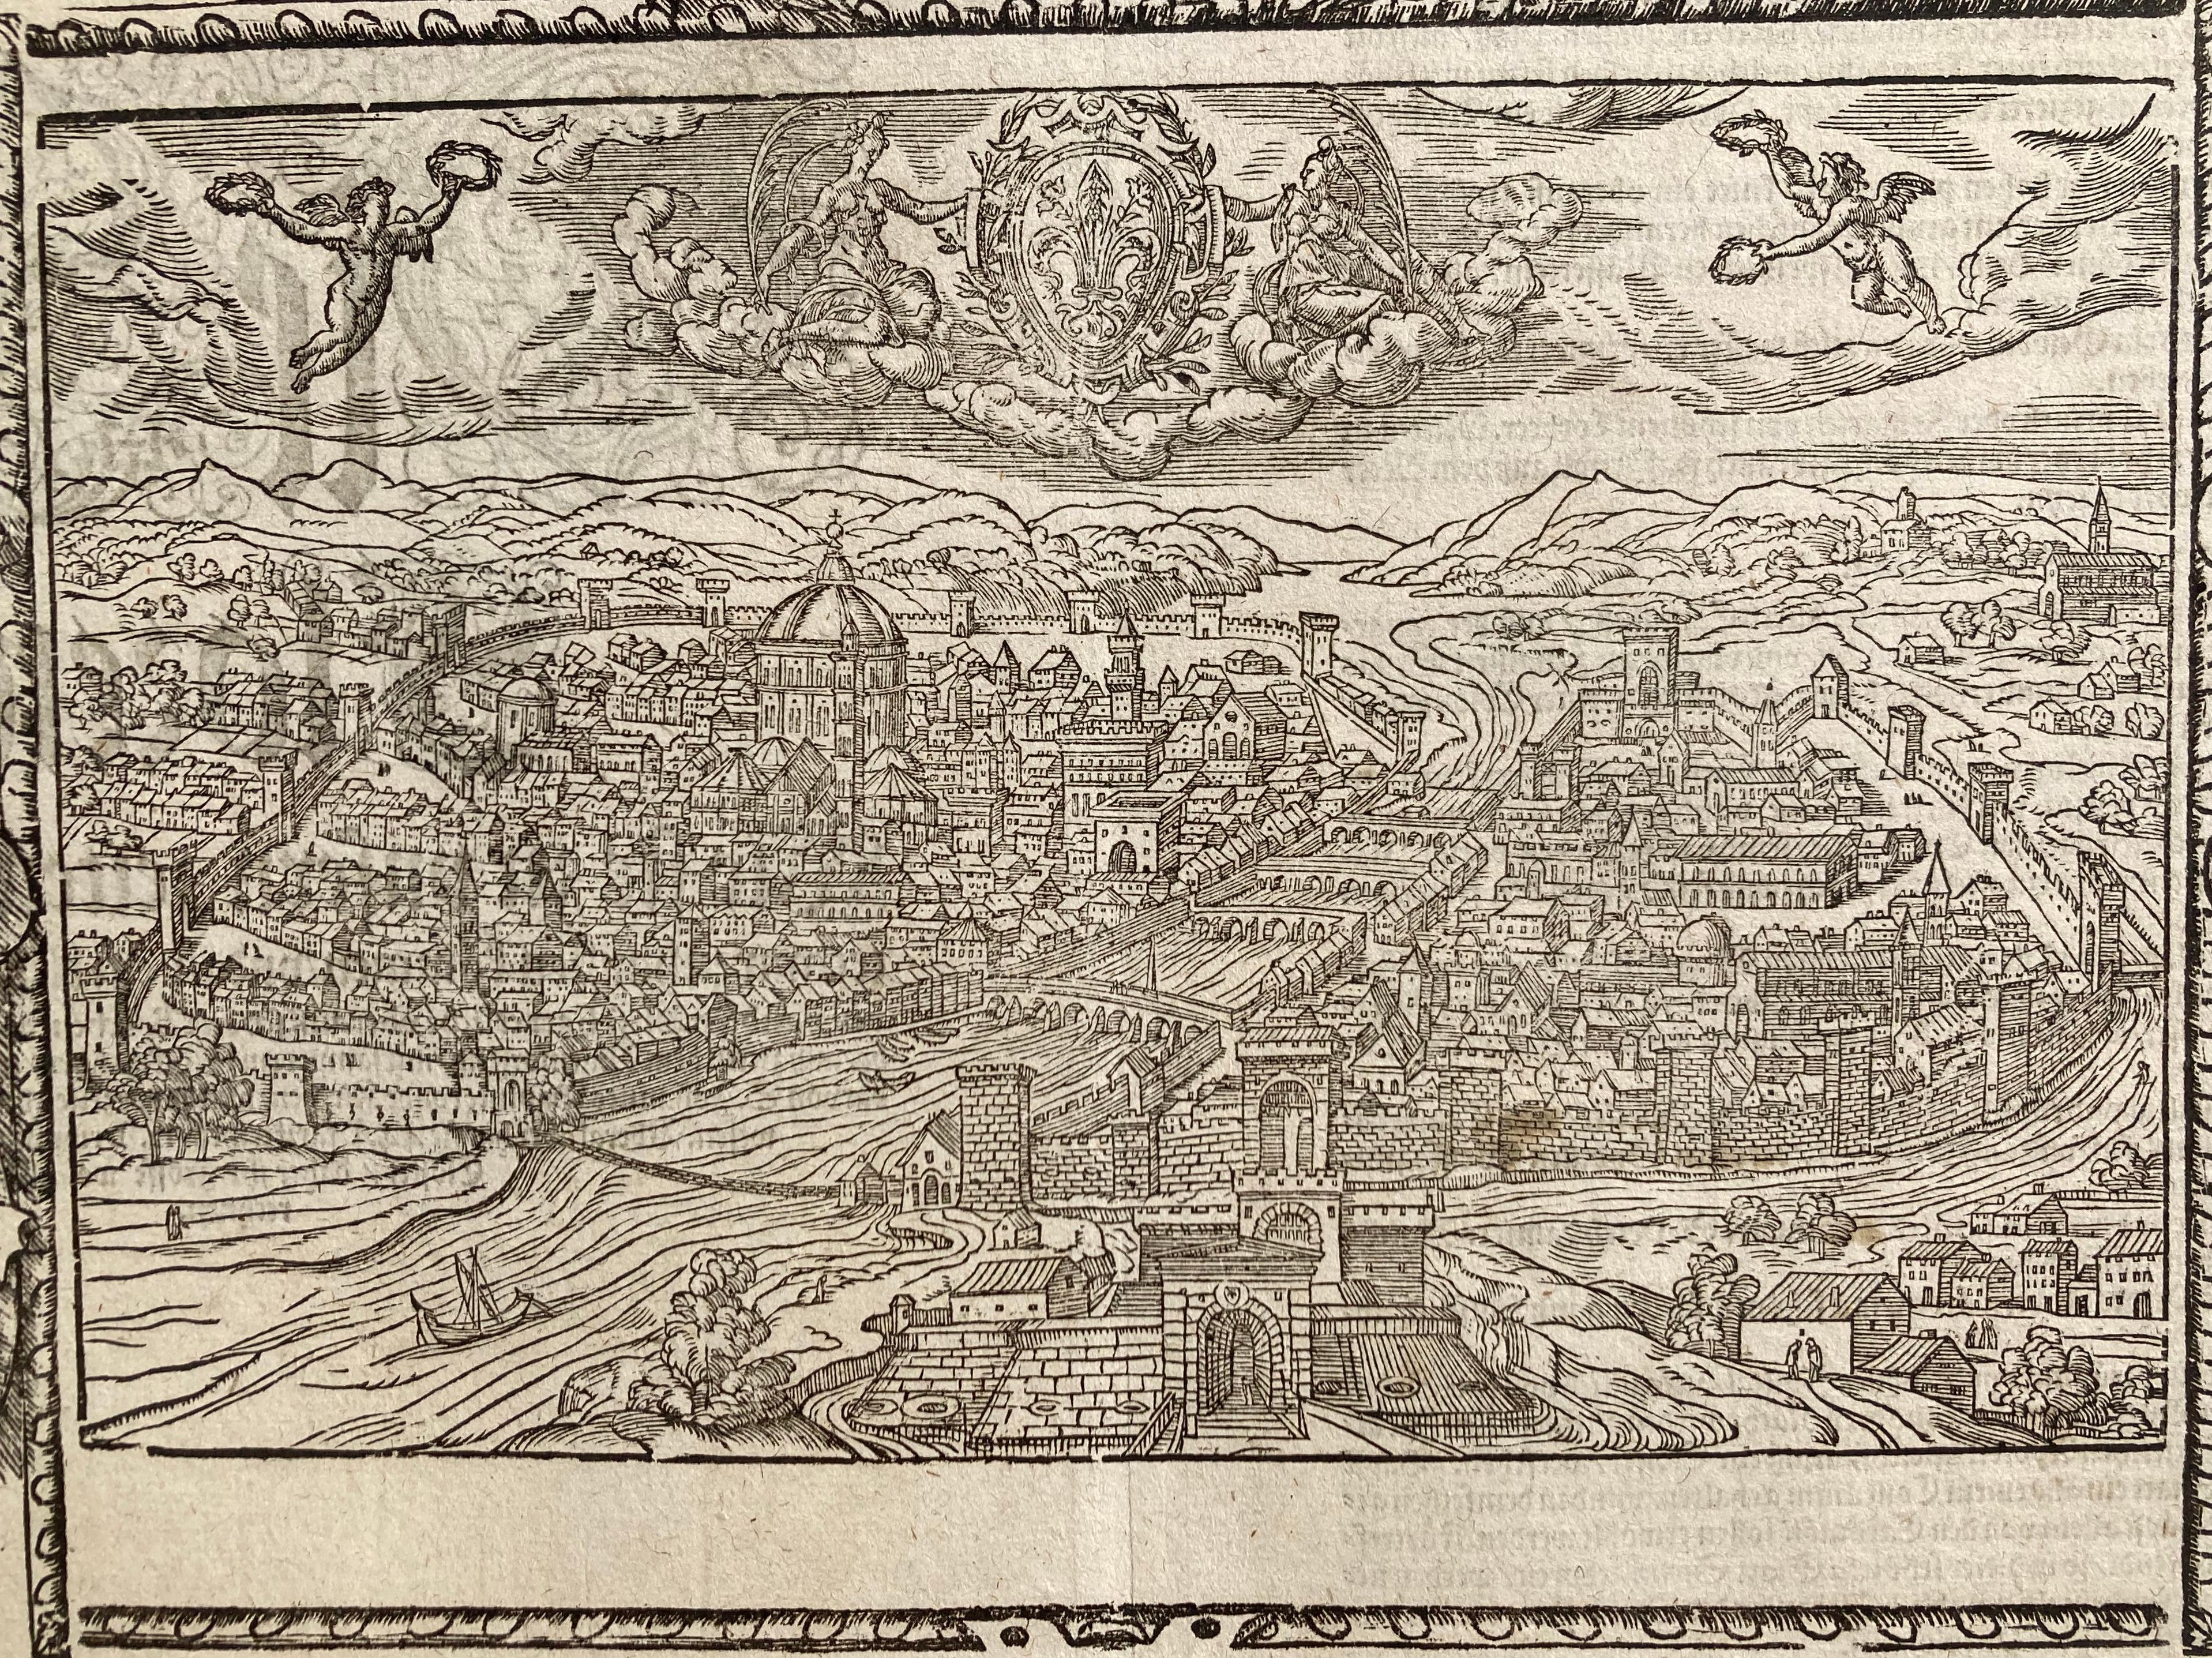 !6th c. VIEW OF FLORENCE  - Print by Sebastian Münster